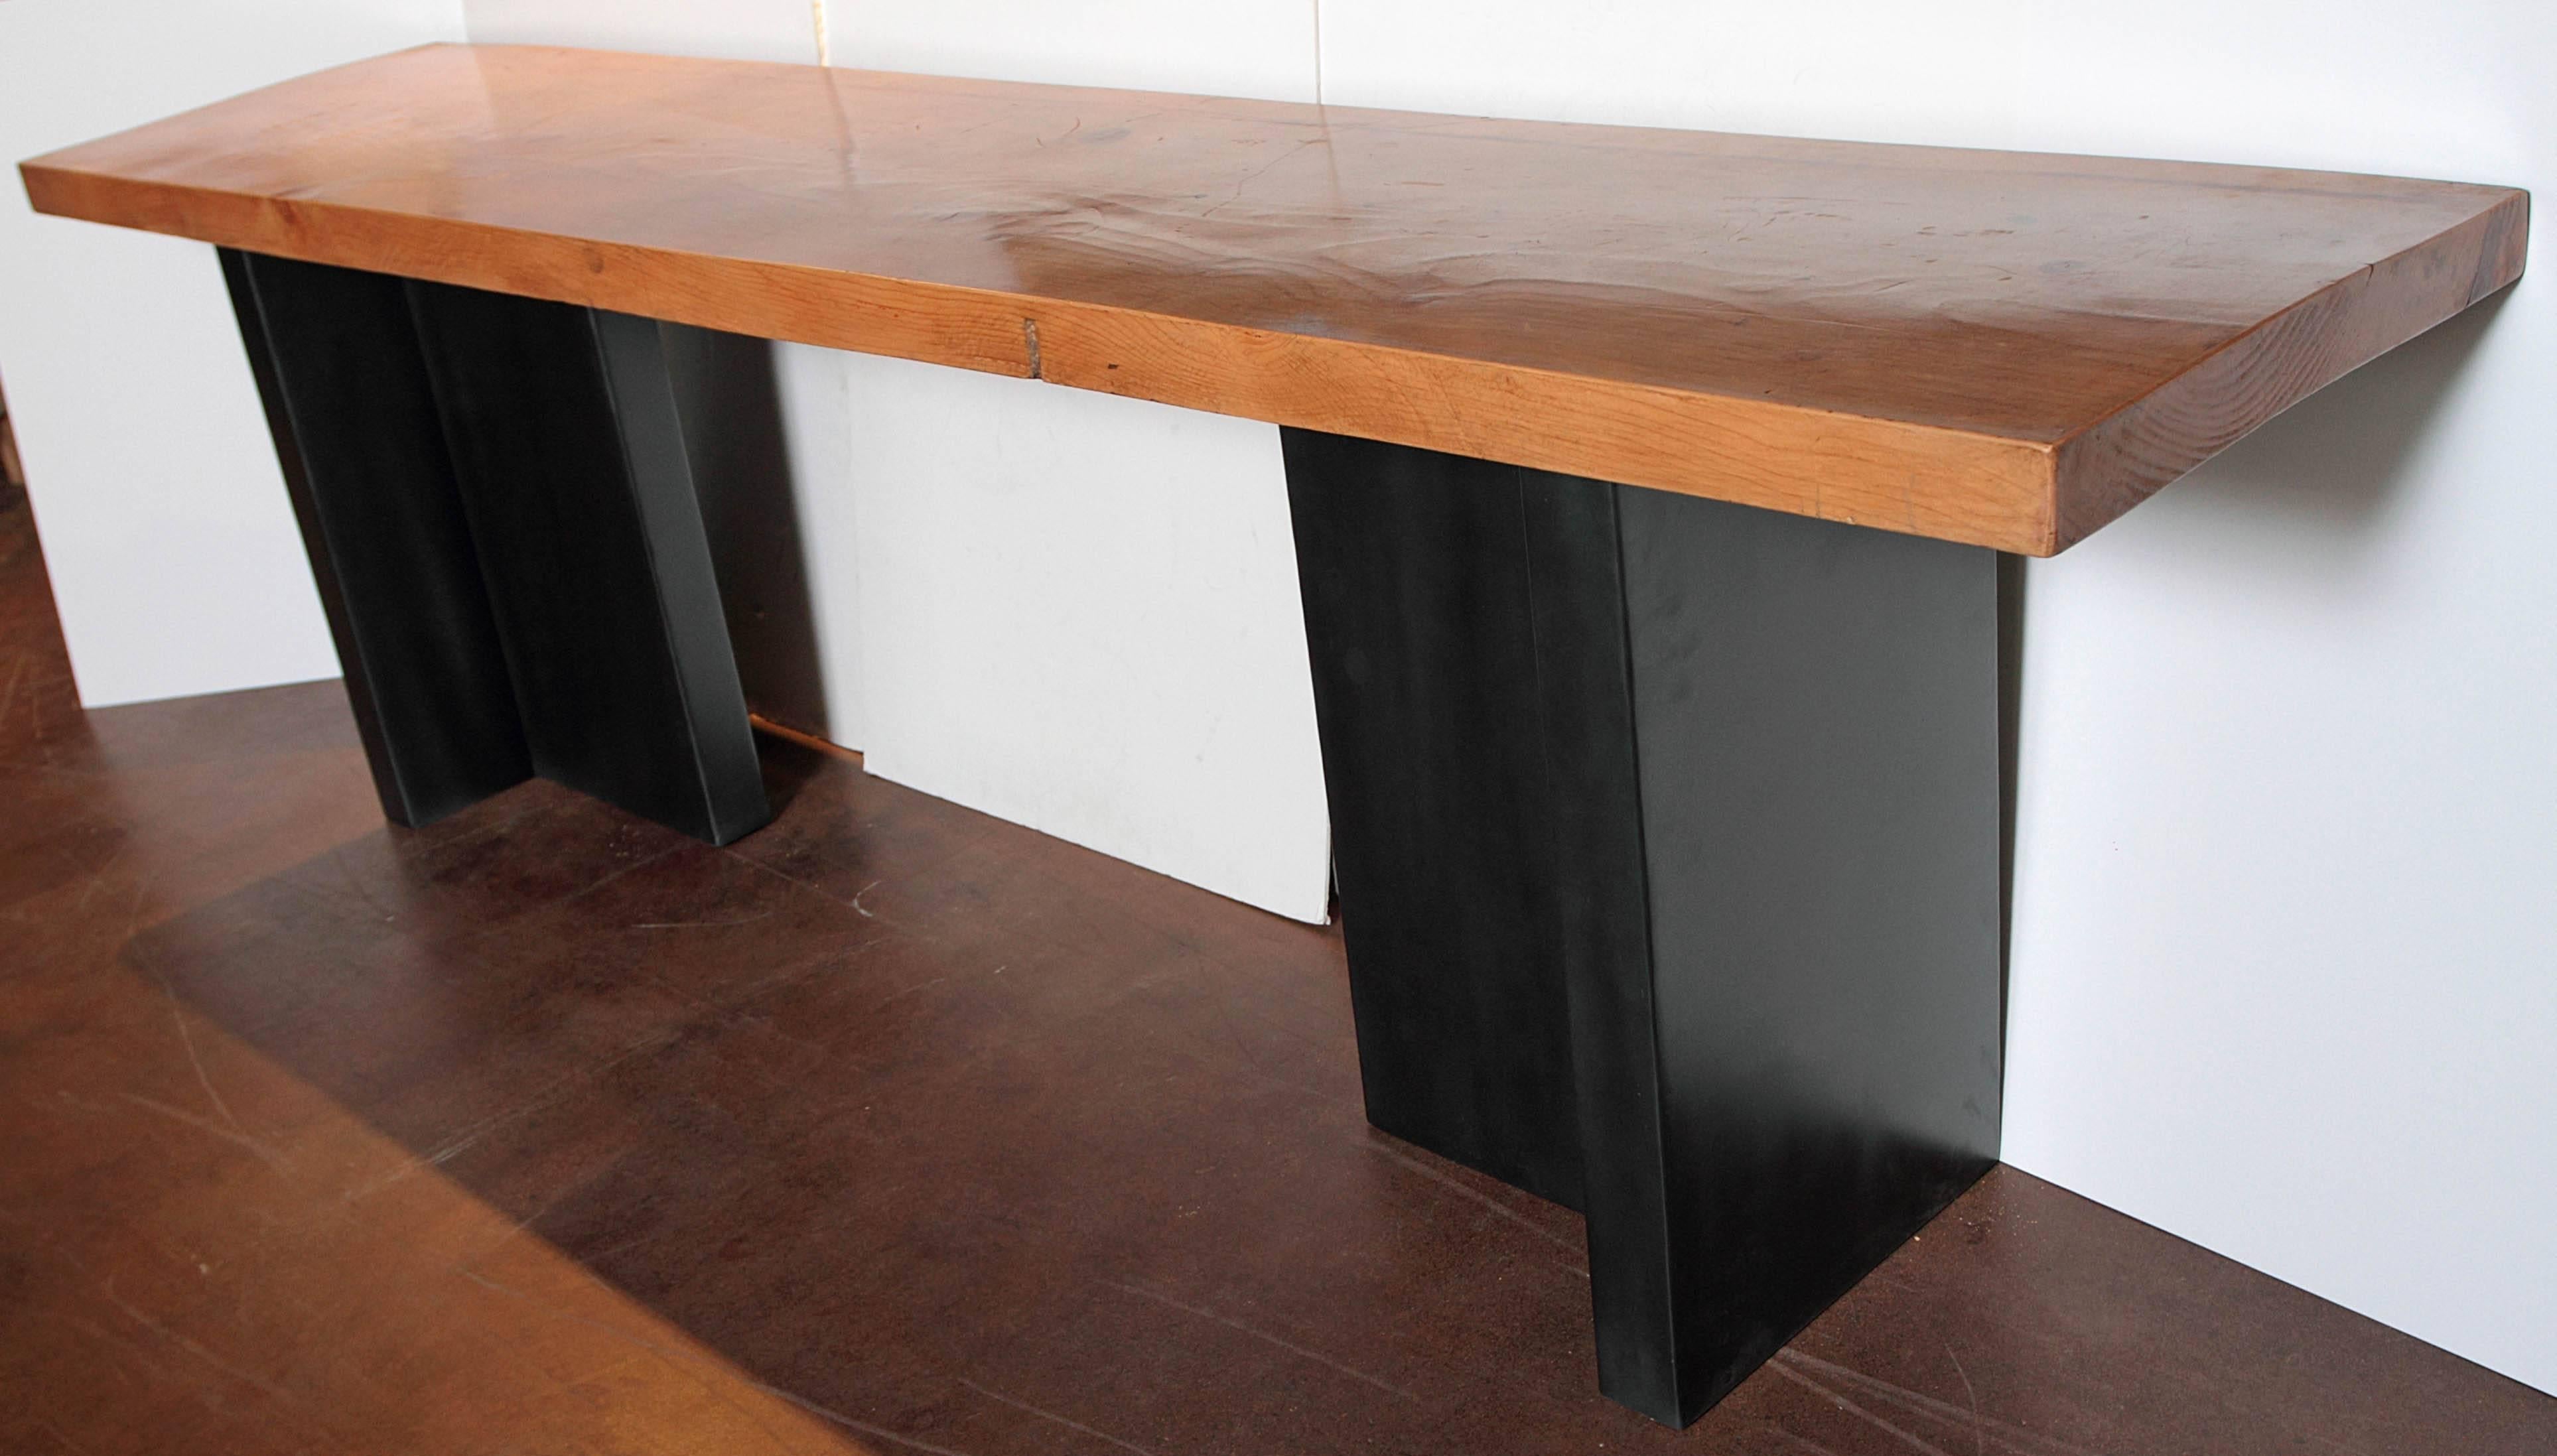 Contemporary Elm Slab Console Table 
Made from reclaimed elm slab with a honey medium tone coloration
Artisan crafted contemporary modern ebony color steel base 
Can be used as console table or sofa table at 34"H 
 